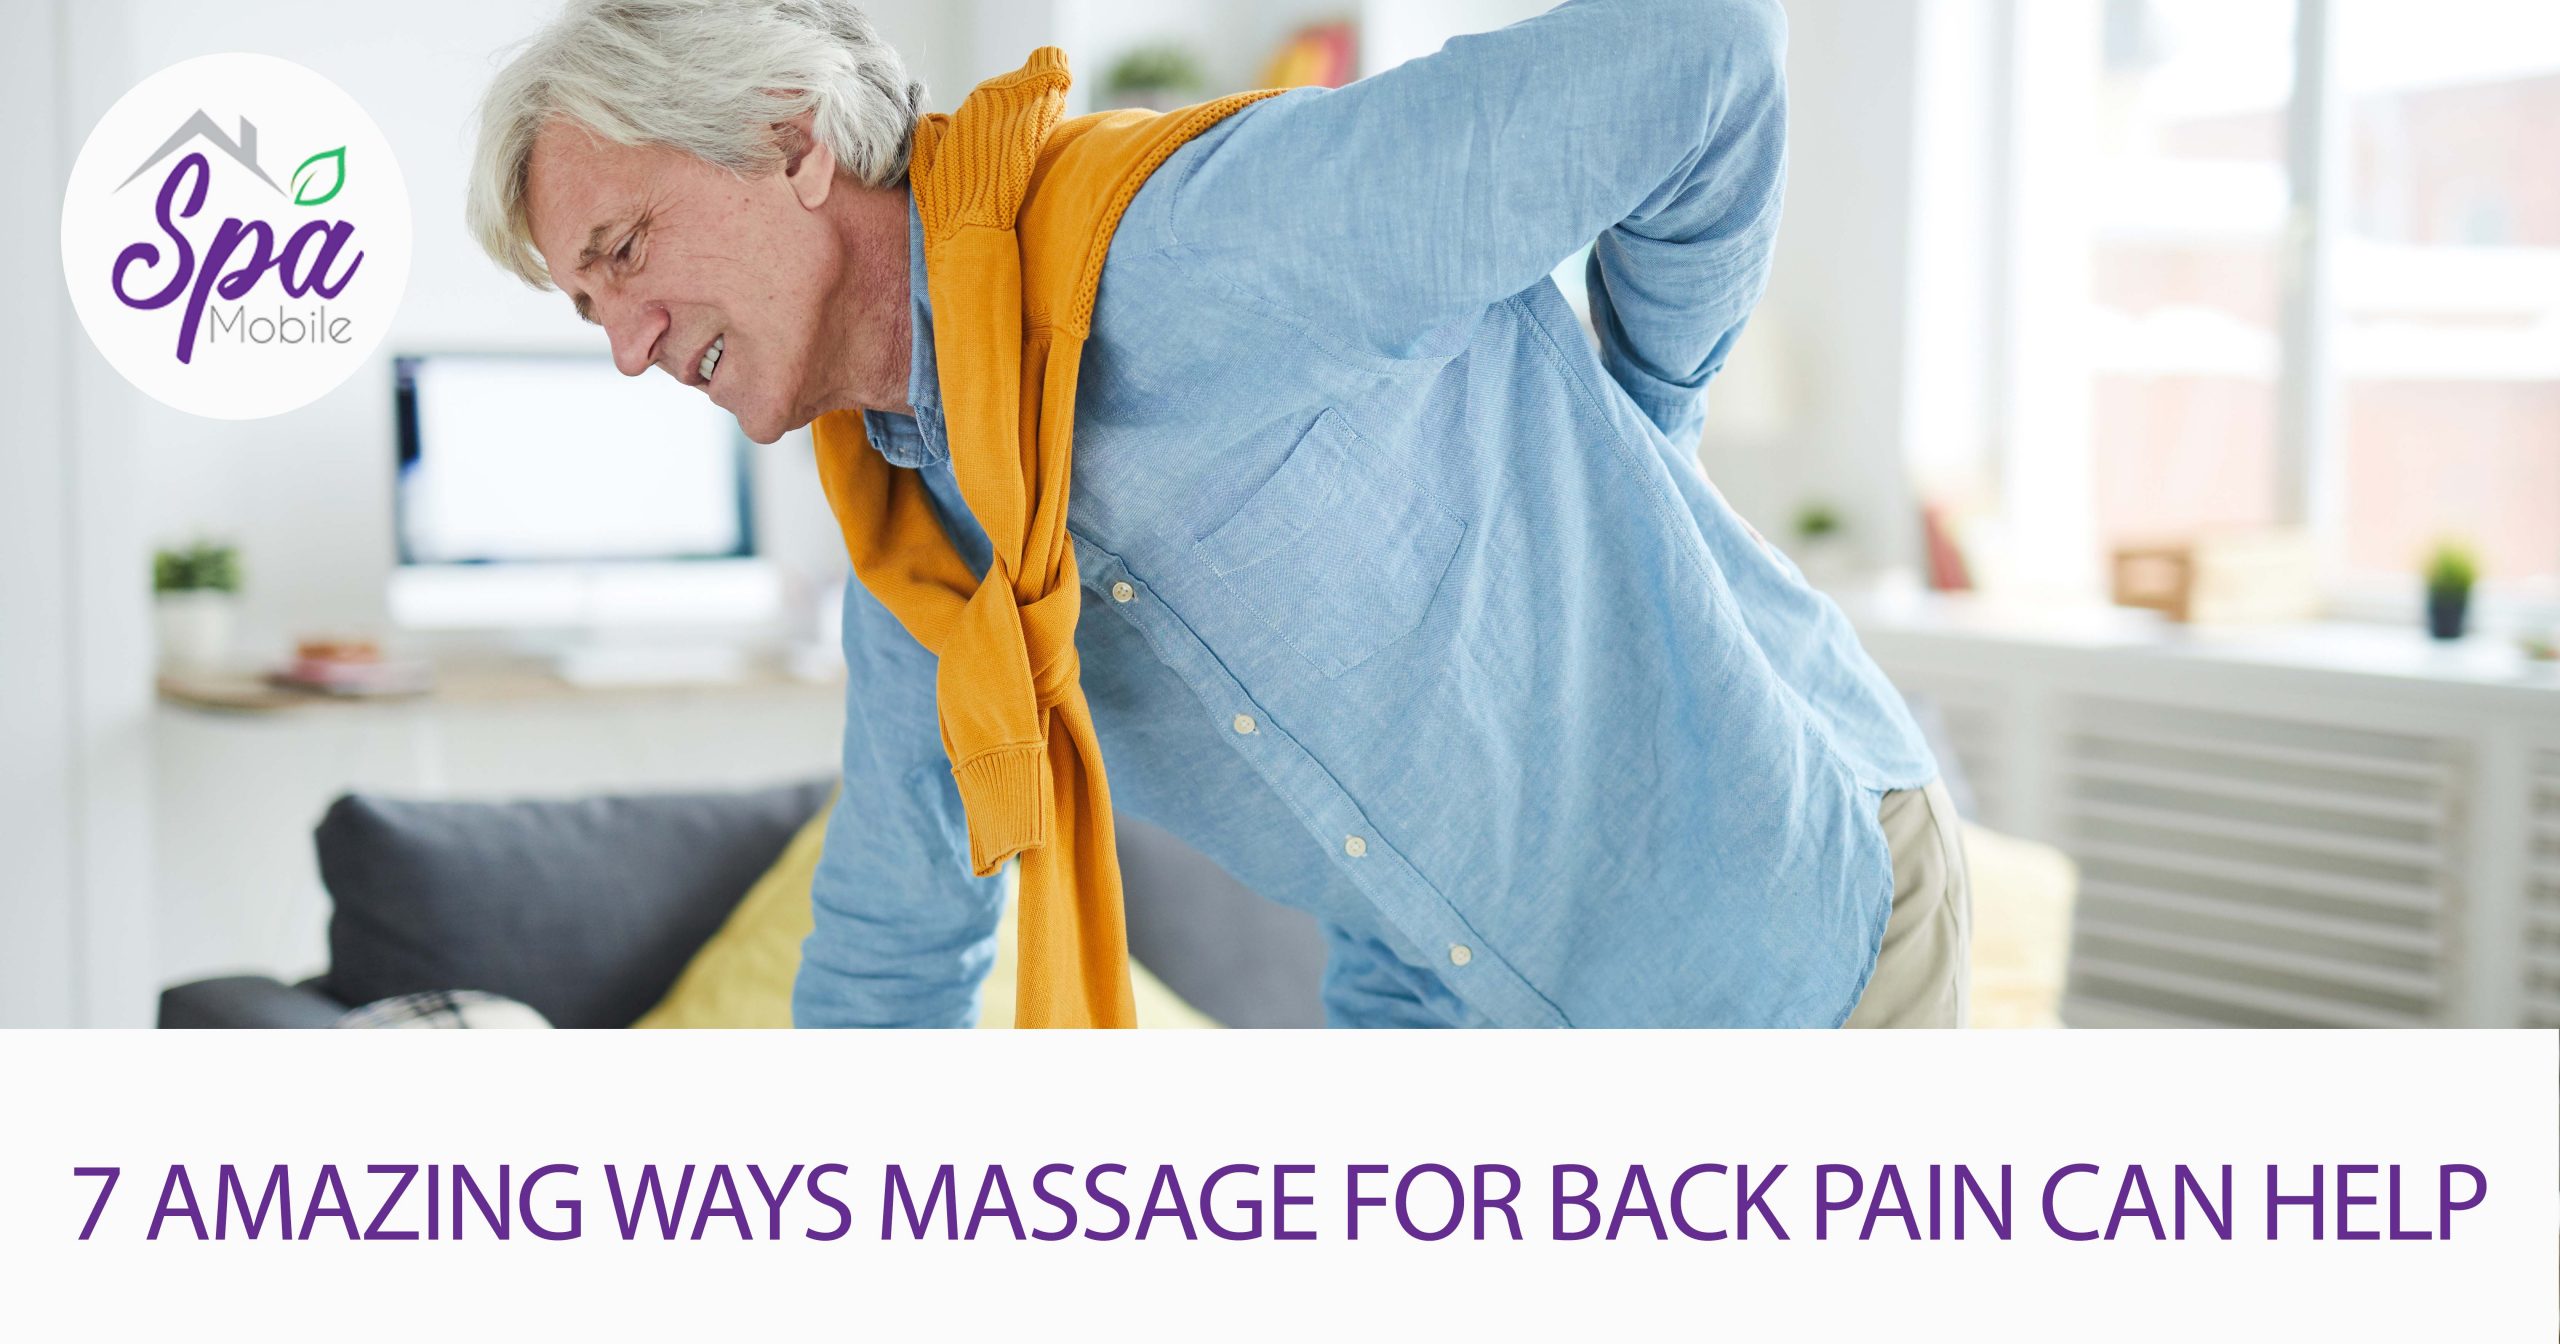 https://www.spa-mobile.com/wp-content/uploads/2020/12/7-Amazing-Ways-Massage-For-Back-Pain-Can-Help-scaled.jpg